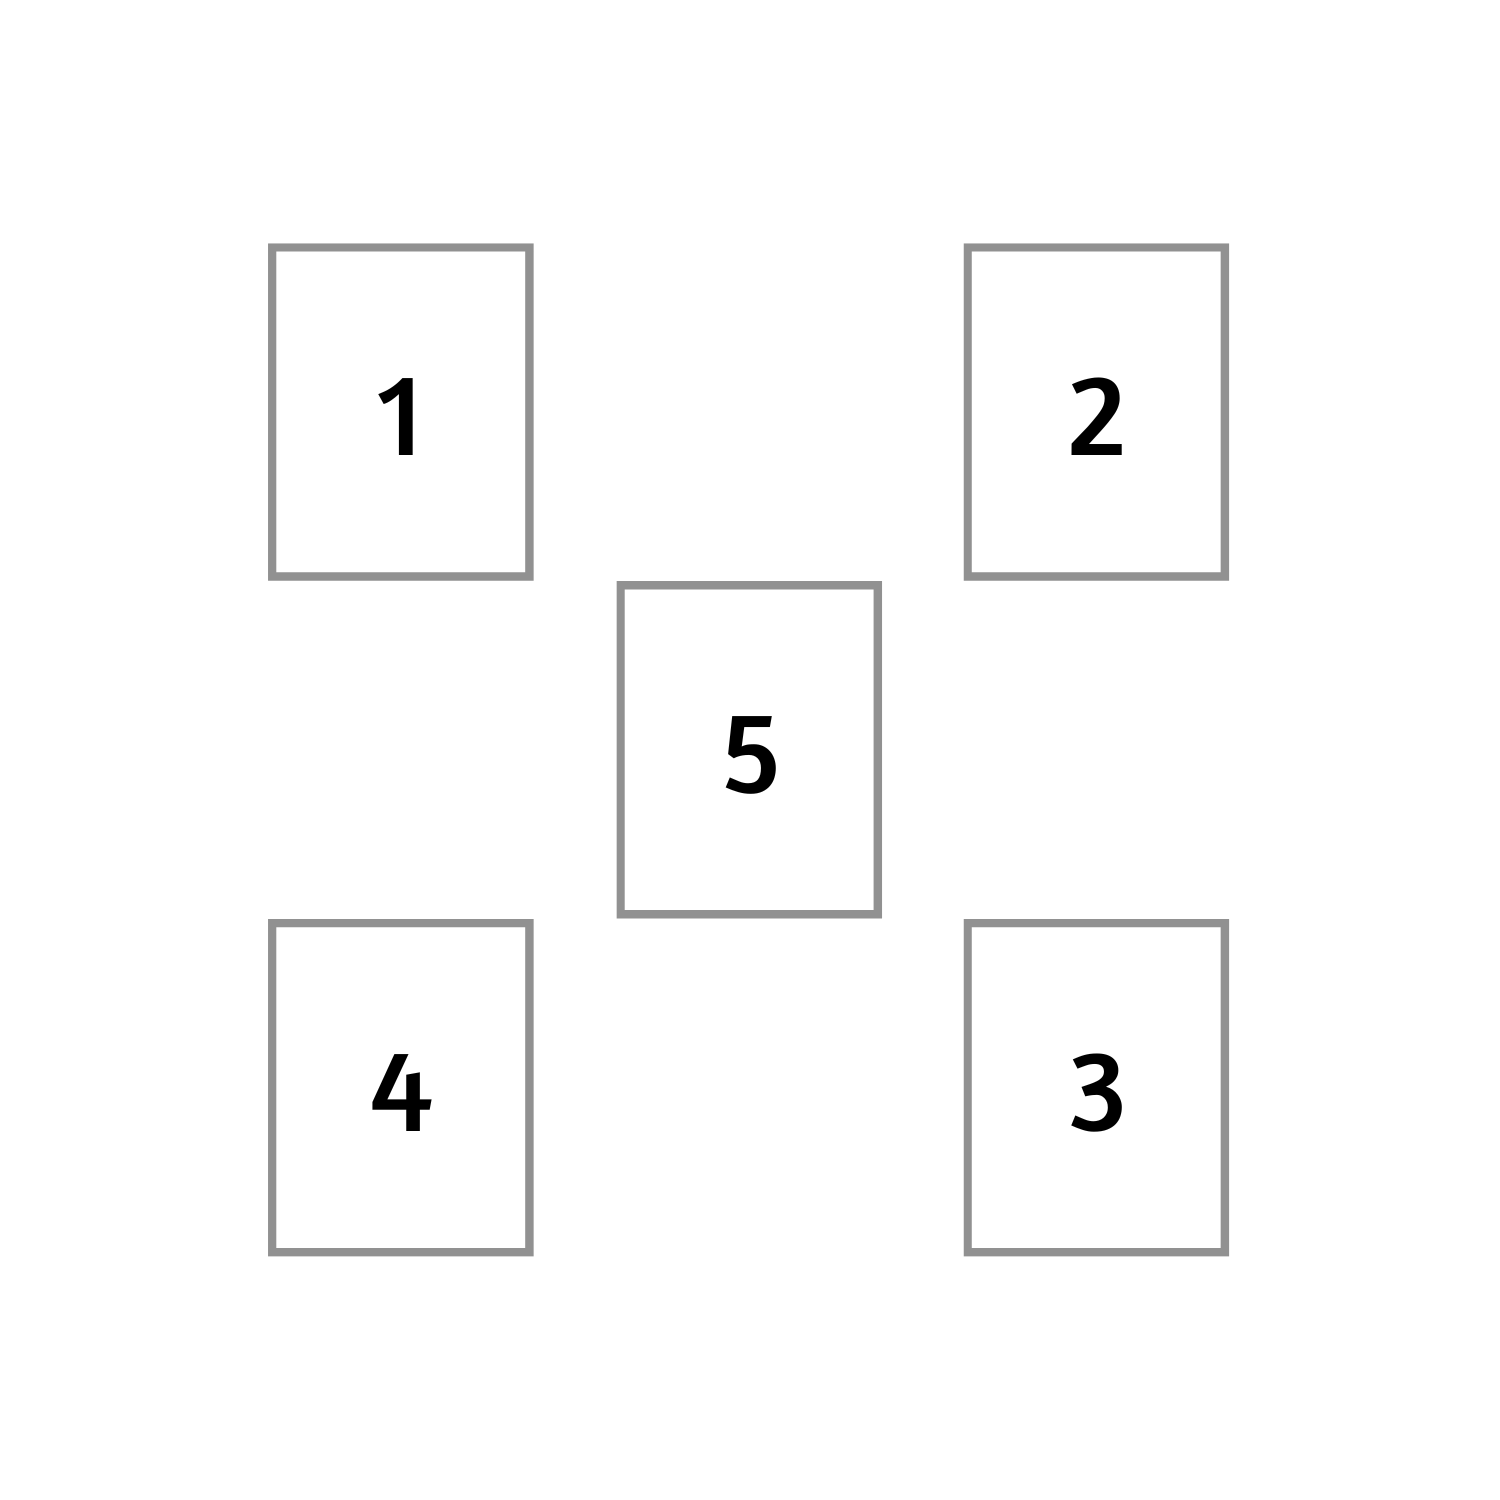 Image description: five rectangles representing tarot cards in a layout. The first card starts at the top left corner, the second directly across from it to the right. The third card is below the second, and the fourth is to the left of the third and directly underneath the first card. They form a square, and in the center of this square is the fifth and final card. 